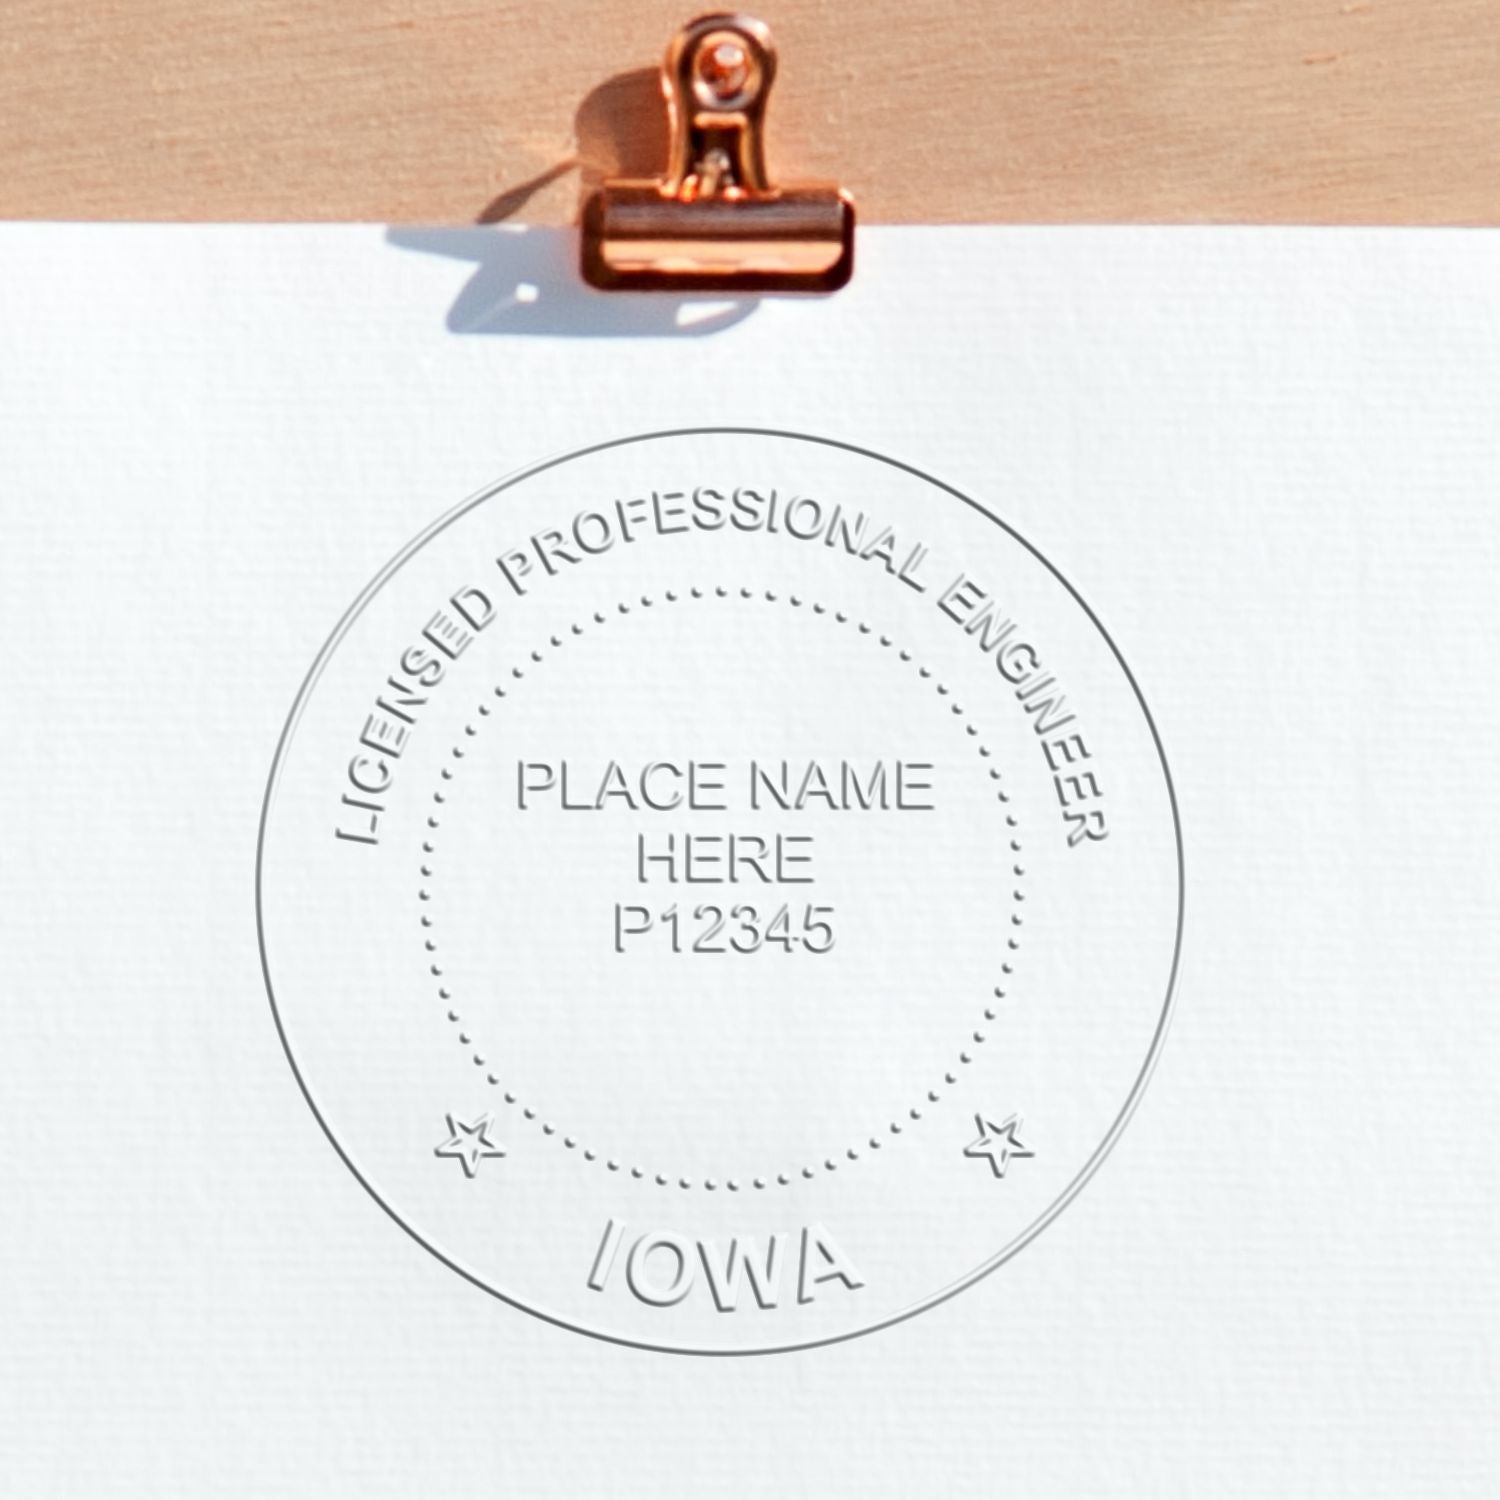 A lifestyle photo showing a stamped image of the Handheld Iowa Professional Engineer Embosser on a piece of paper